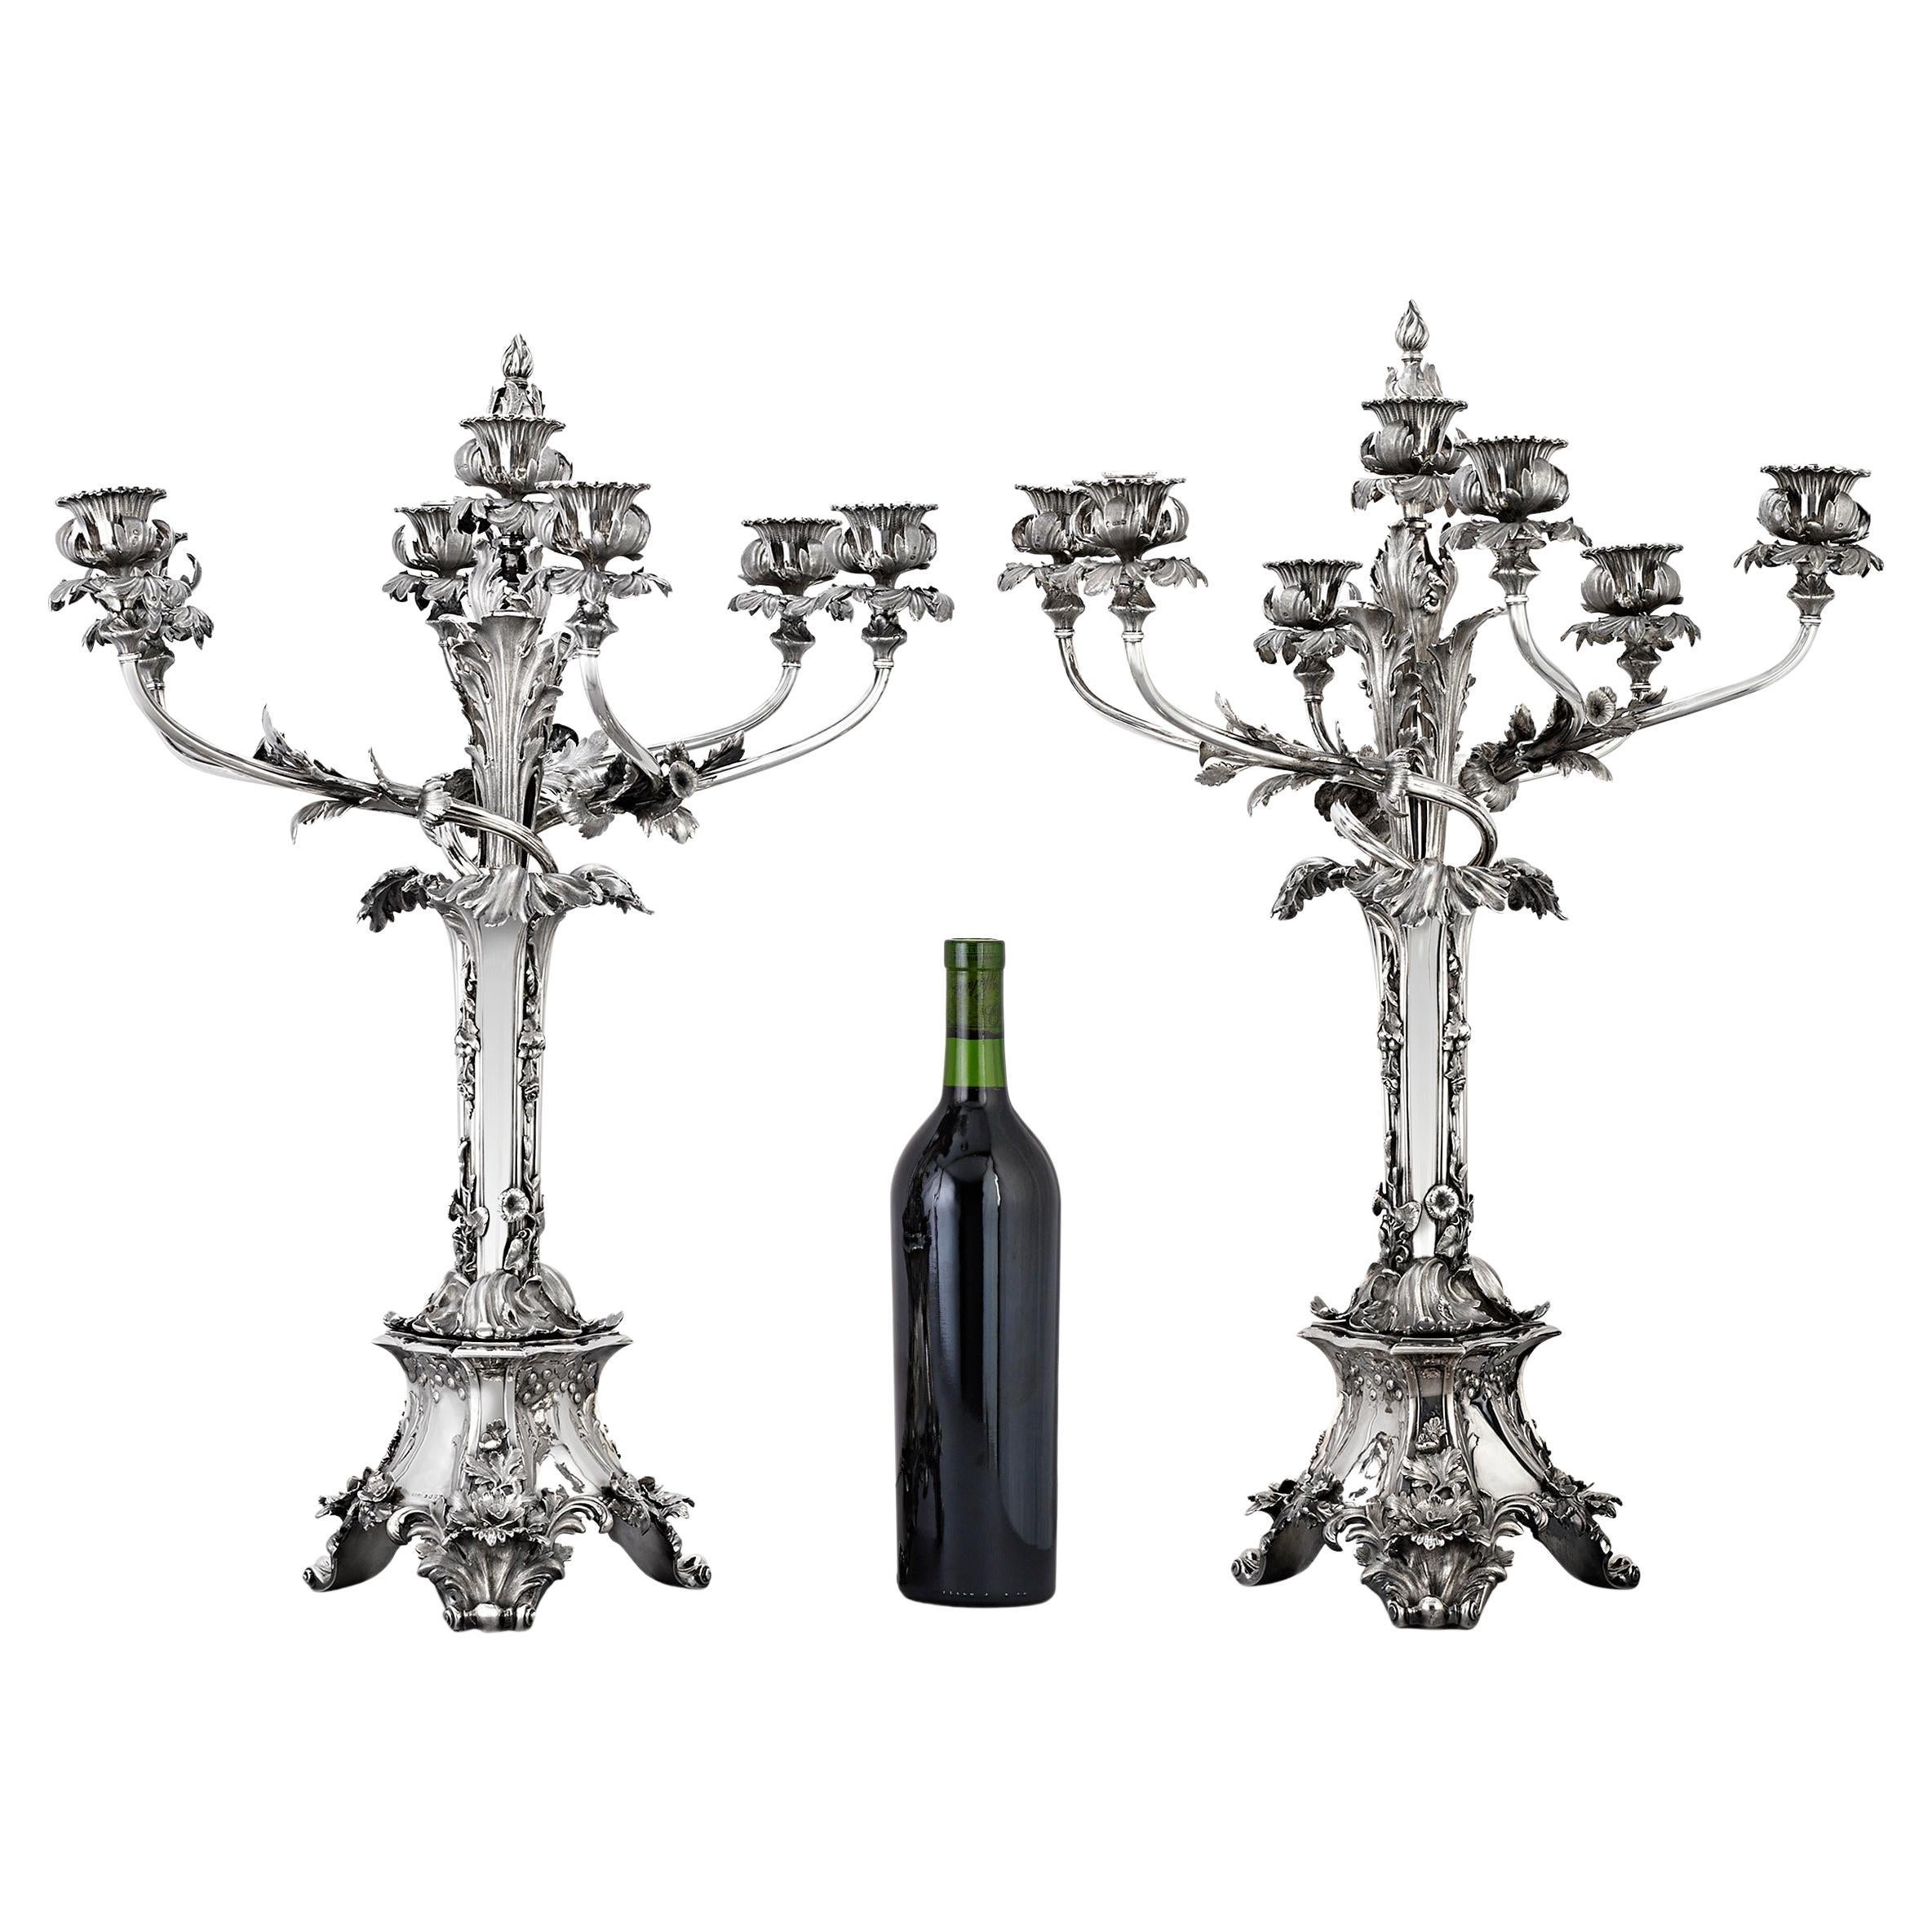 Pair of Silver Neoclassical Candelabra by Robinson, Edkins & Aston